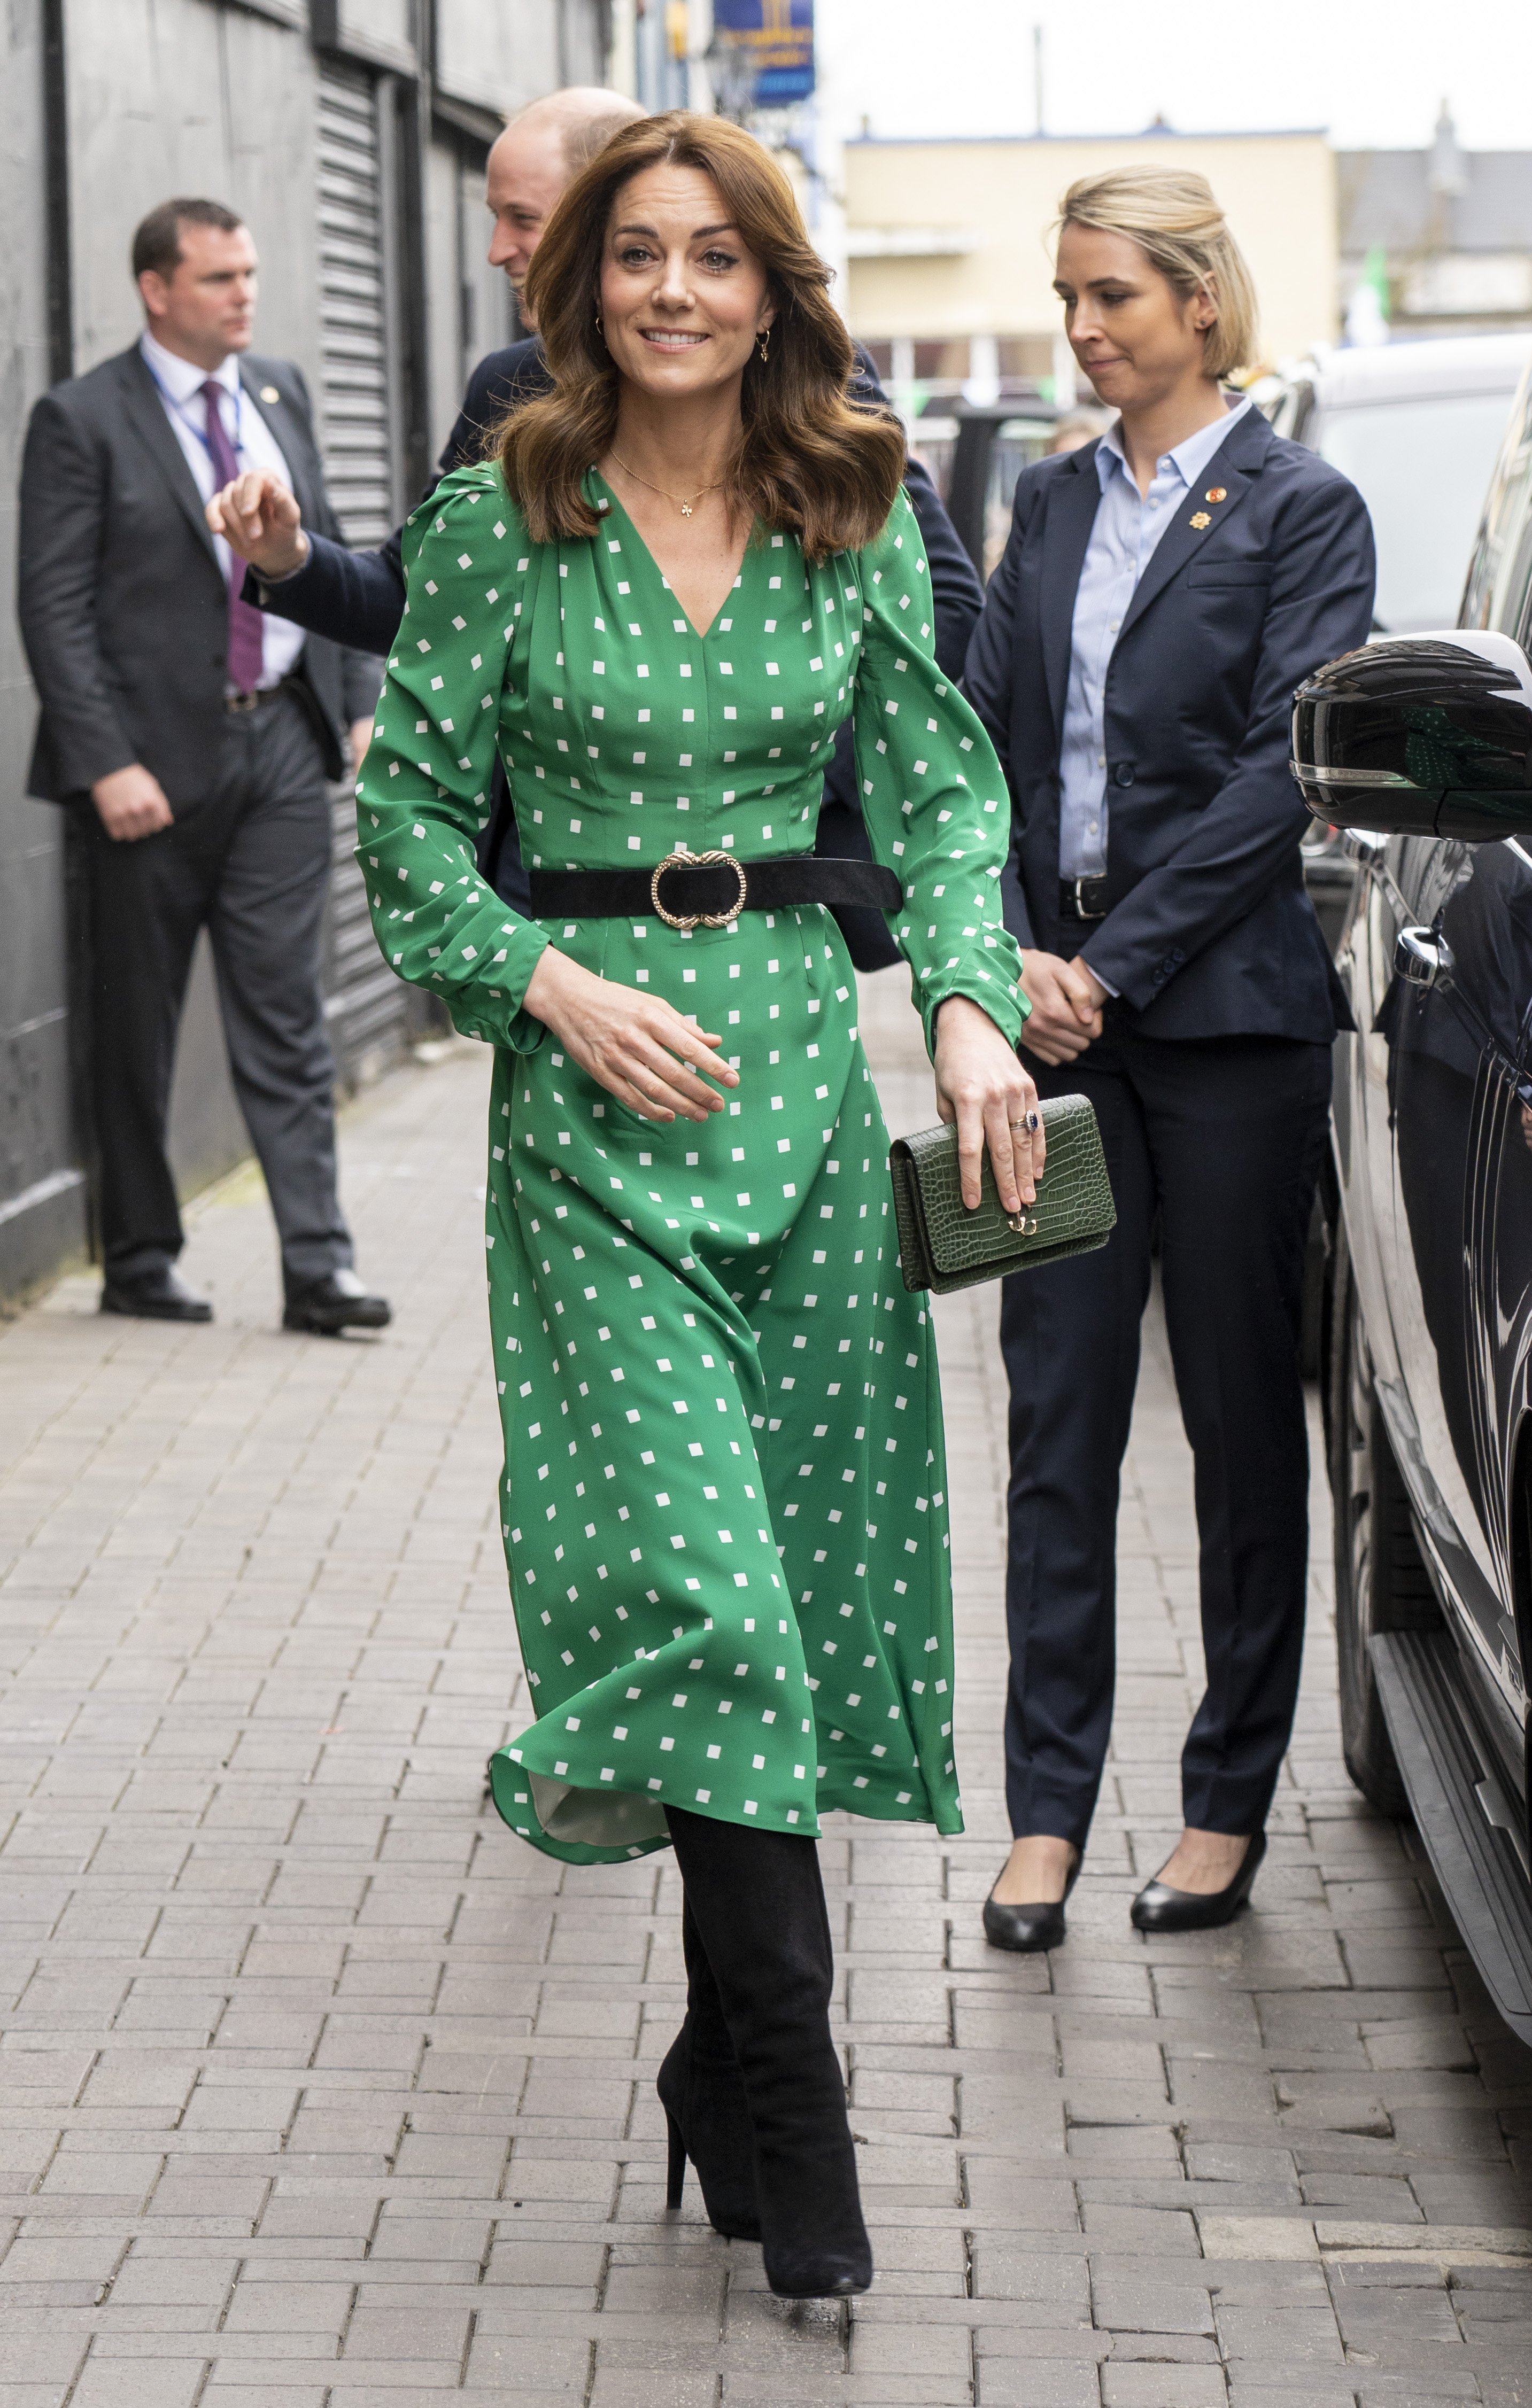 Prince William, Duke of Cambridge and Catherine, Duchess of Cambridge arrive to visit a family-owned, traditional Irish pub in Galway city center during day three of their visit to Ireland on March 5, 2020 in Galway, Ireland.  |  Source: Getty Images